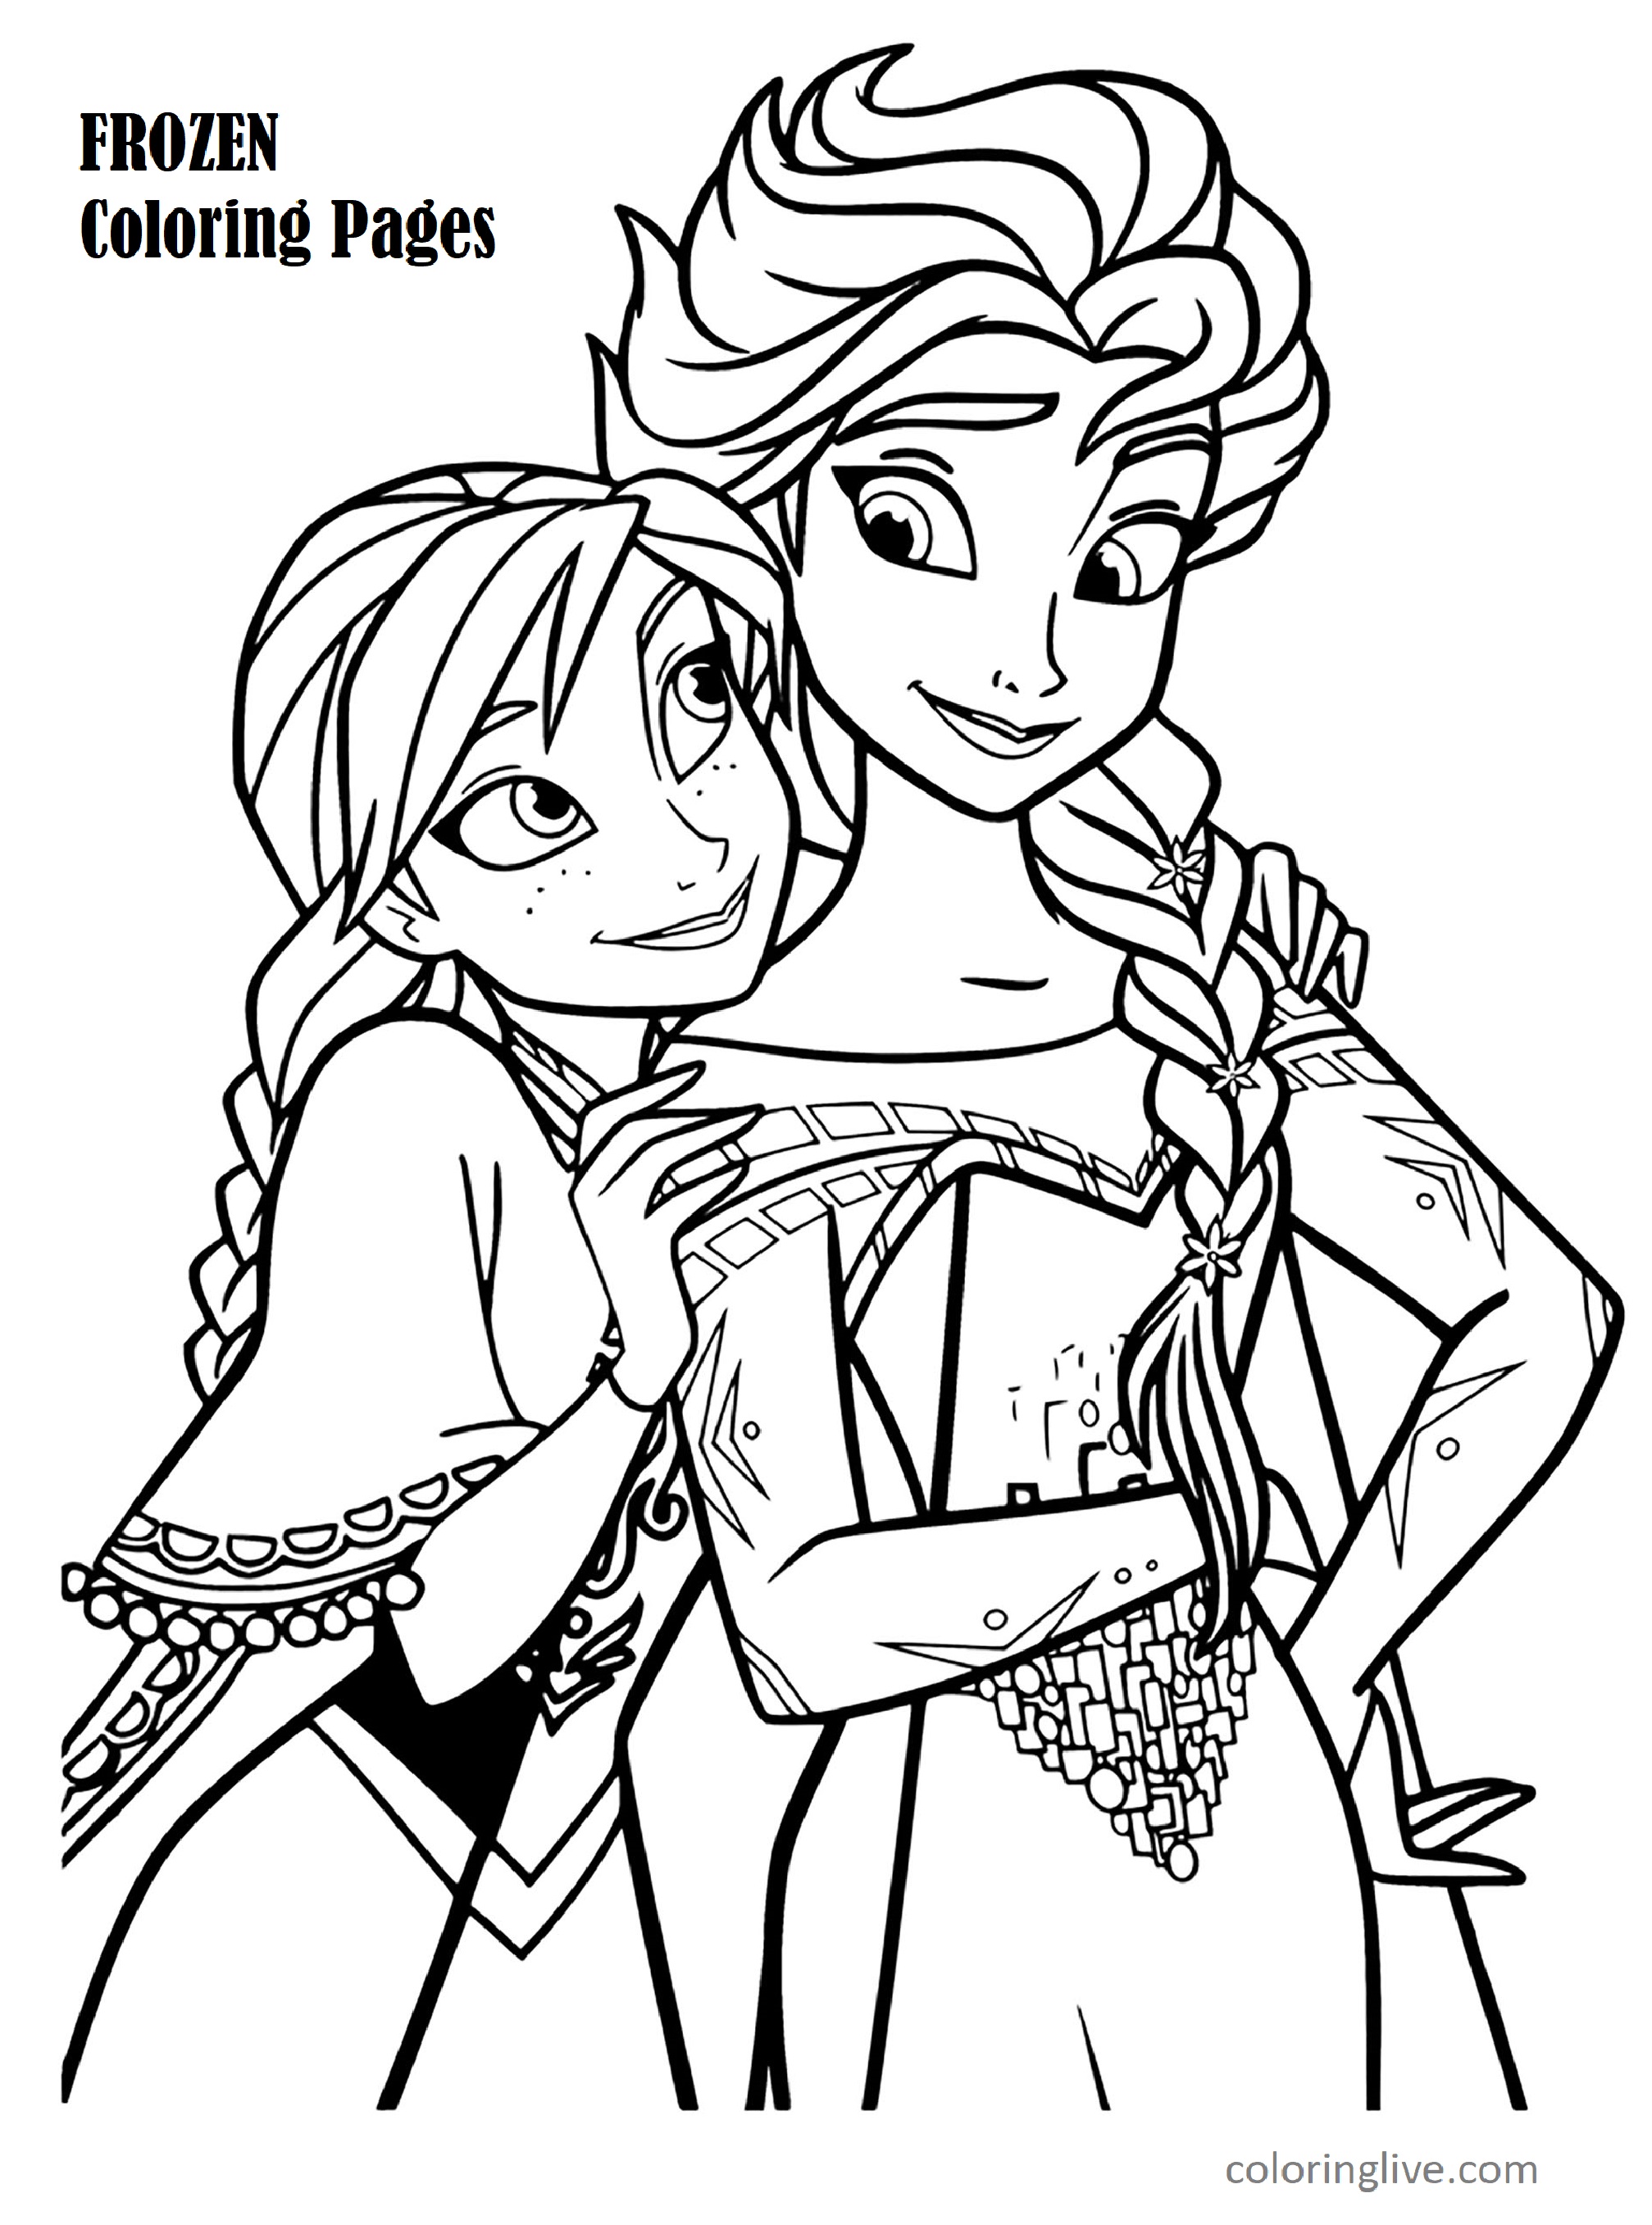 Printable Frozen 2 Coloring Page for kids.